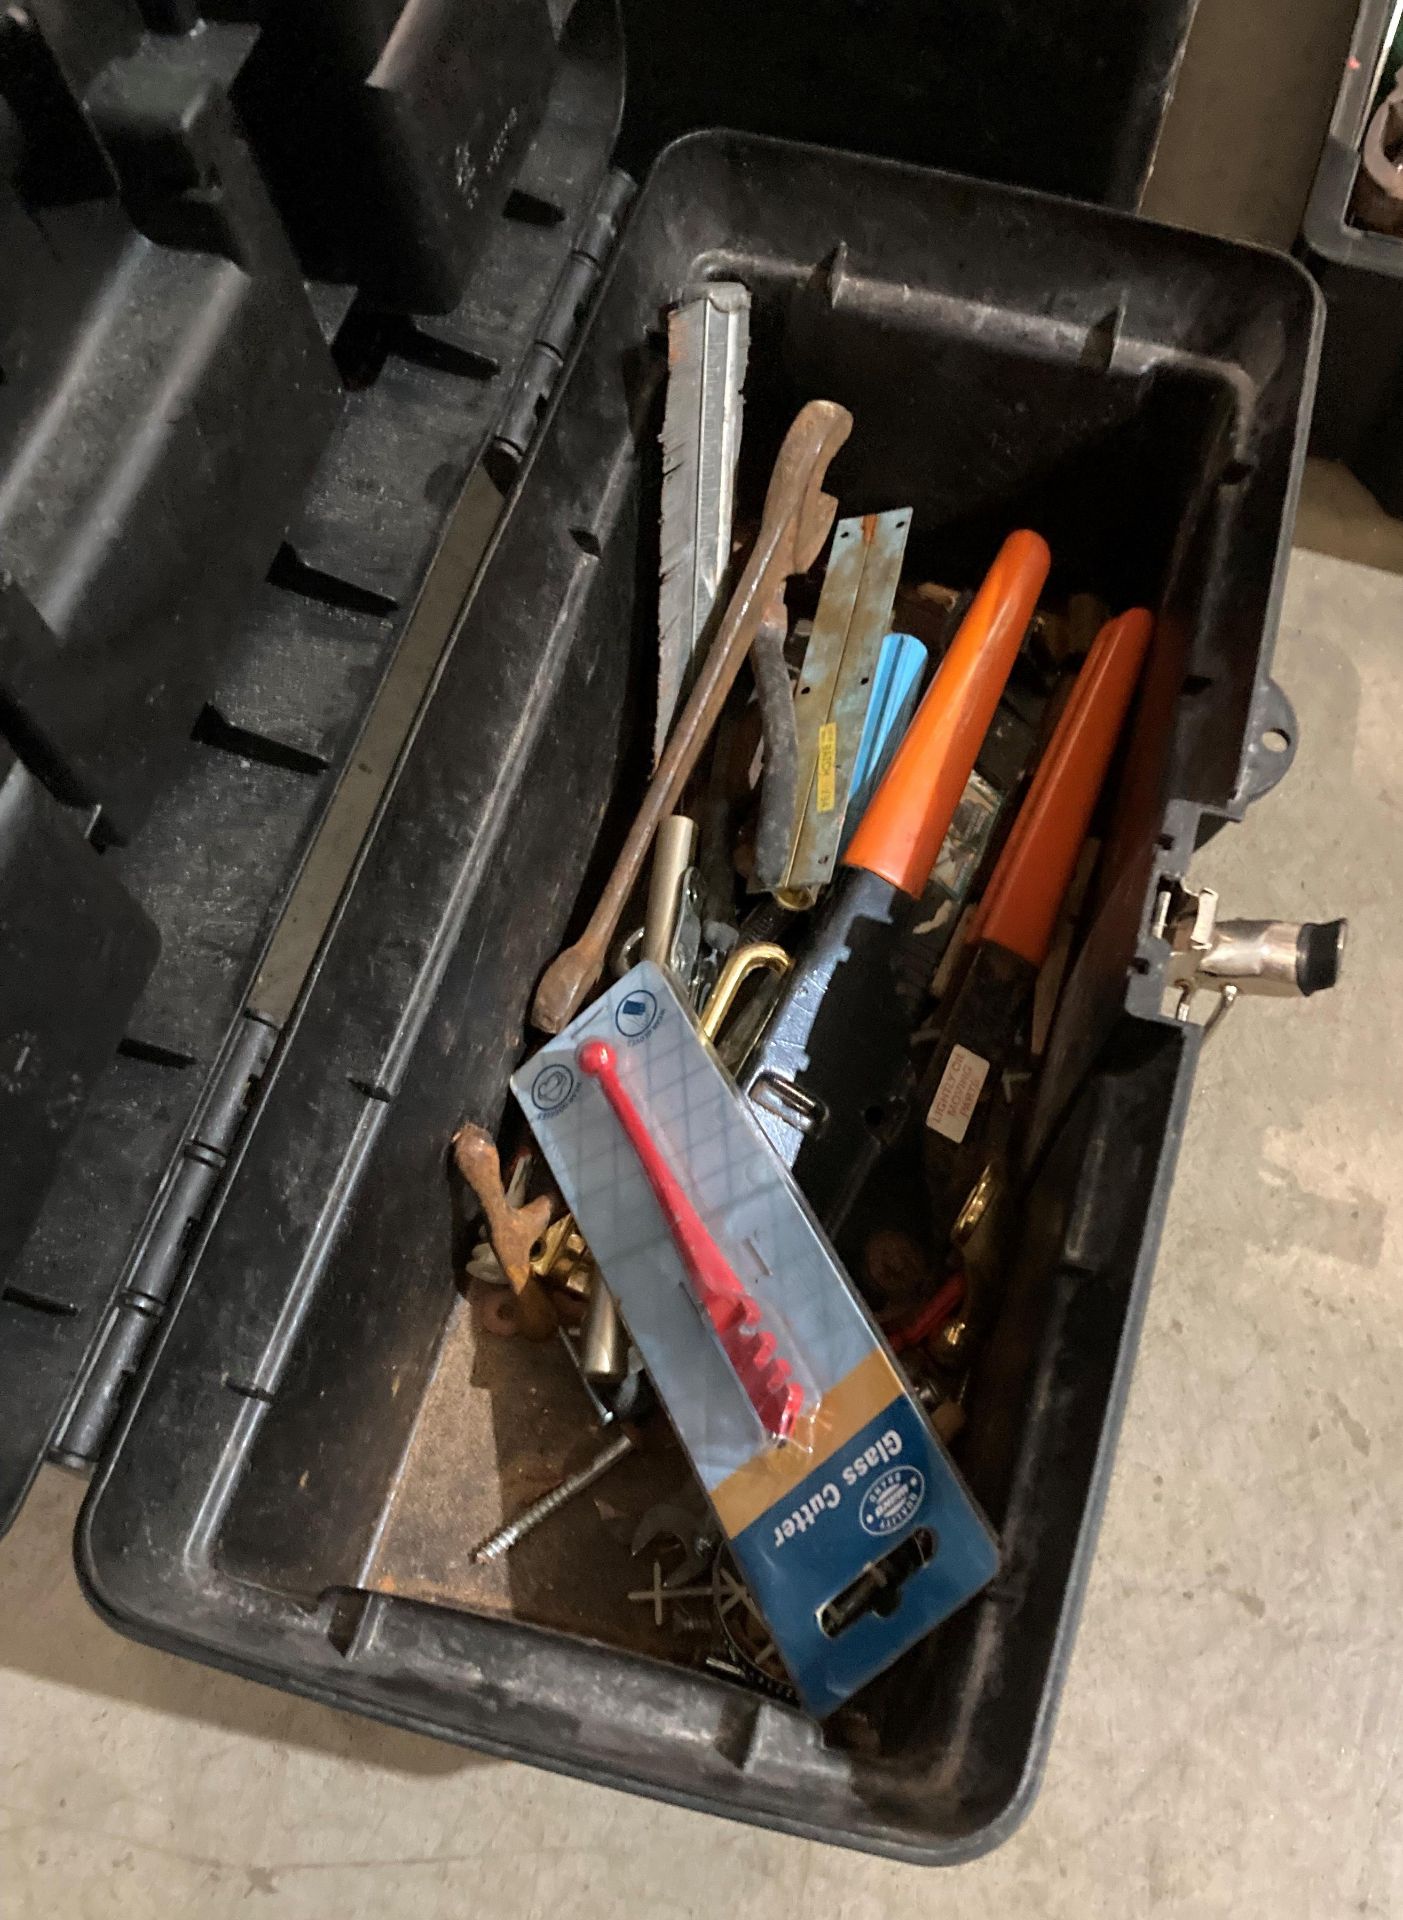 3 x assorted tool boxes and contents - a planes, spanners, mould grips, clamps, - Image 2 of 5